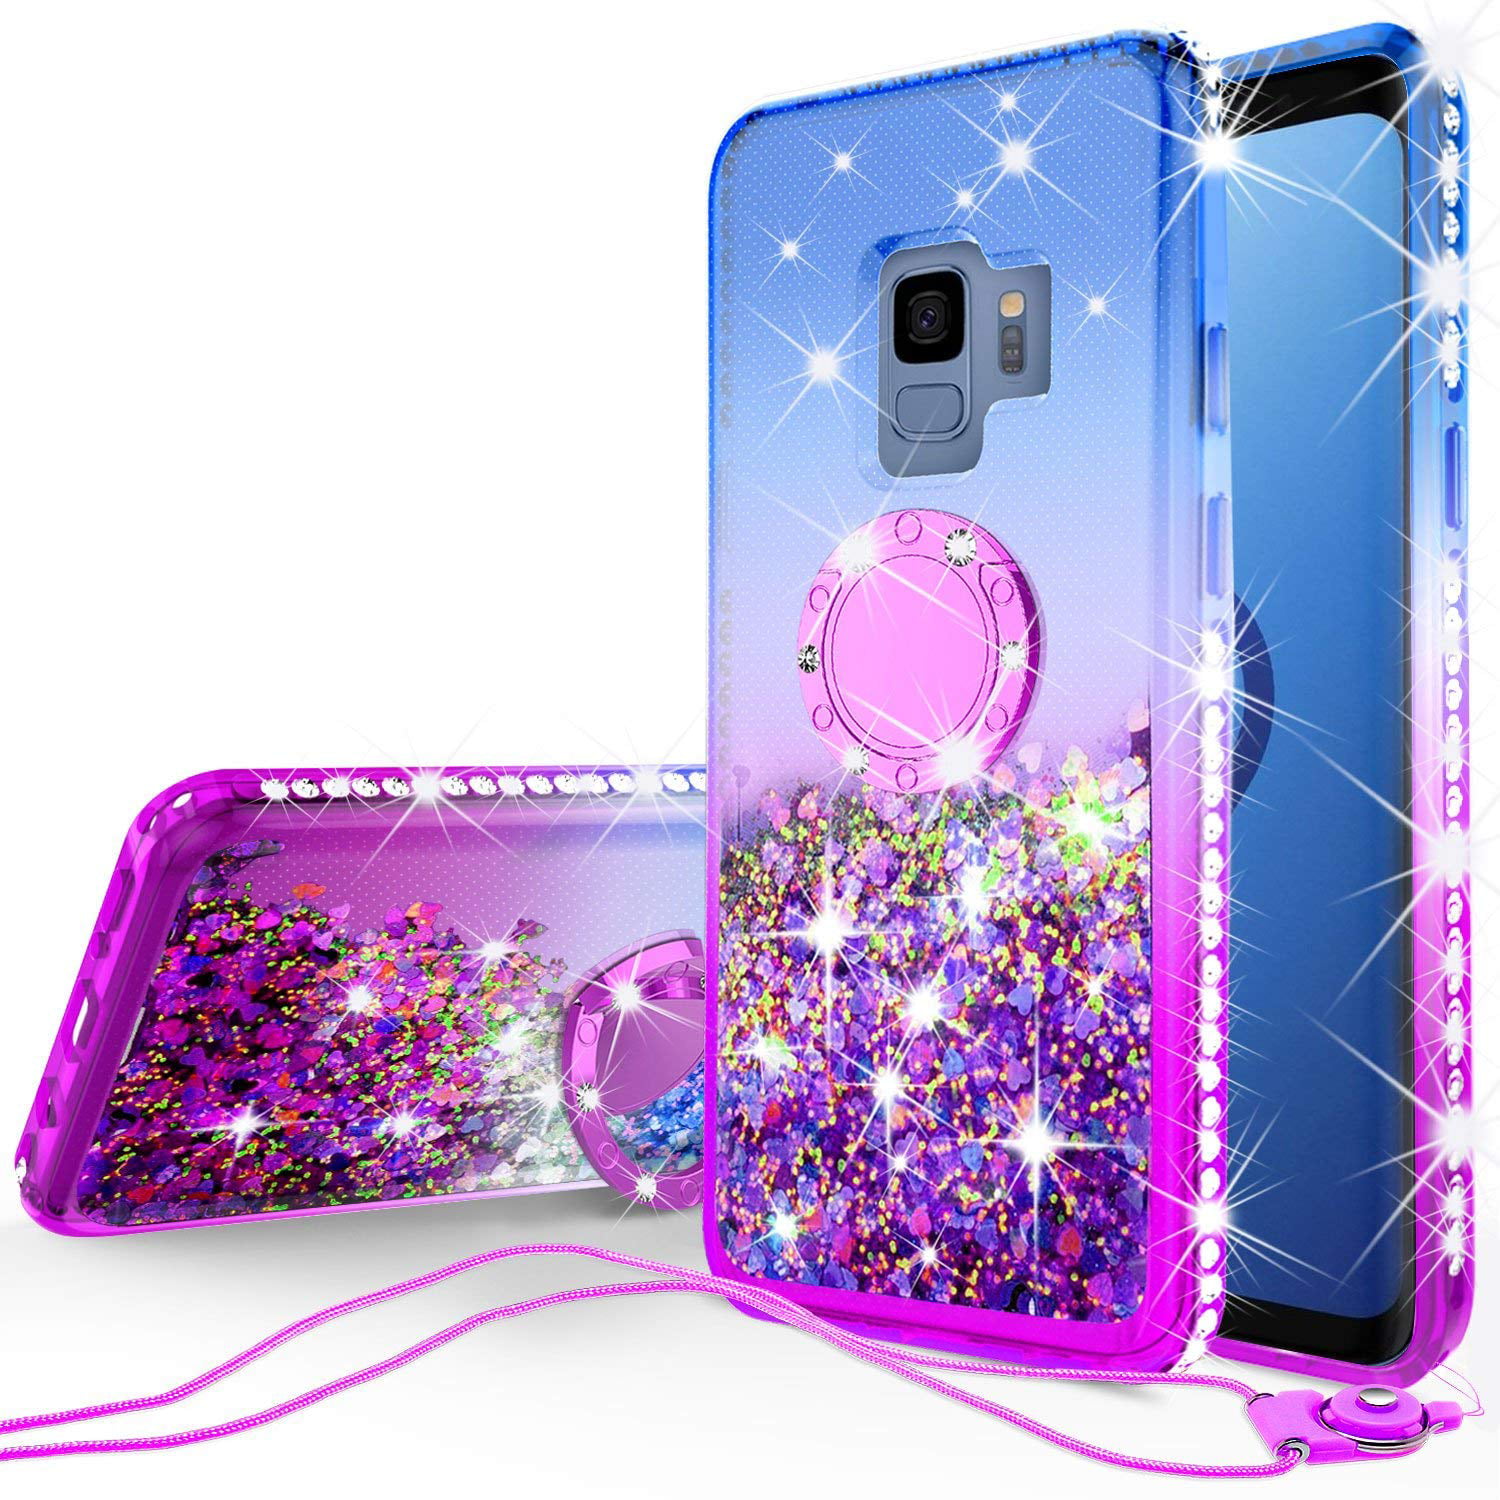 Galaxy S9 Case,ikasus Full-Body 360 Coverage Protective Crystal Clear 2in1 Sparkly Shiny Glitter Bling Front Back Full Coverage Soft Clear TPU Silicone Rubber Case for Samsung Galaxy S9,Rose Gold 